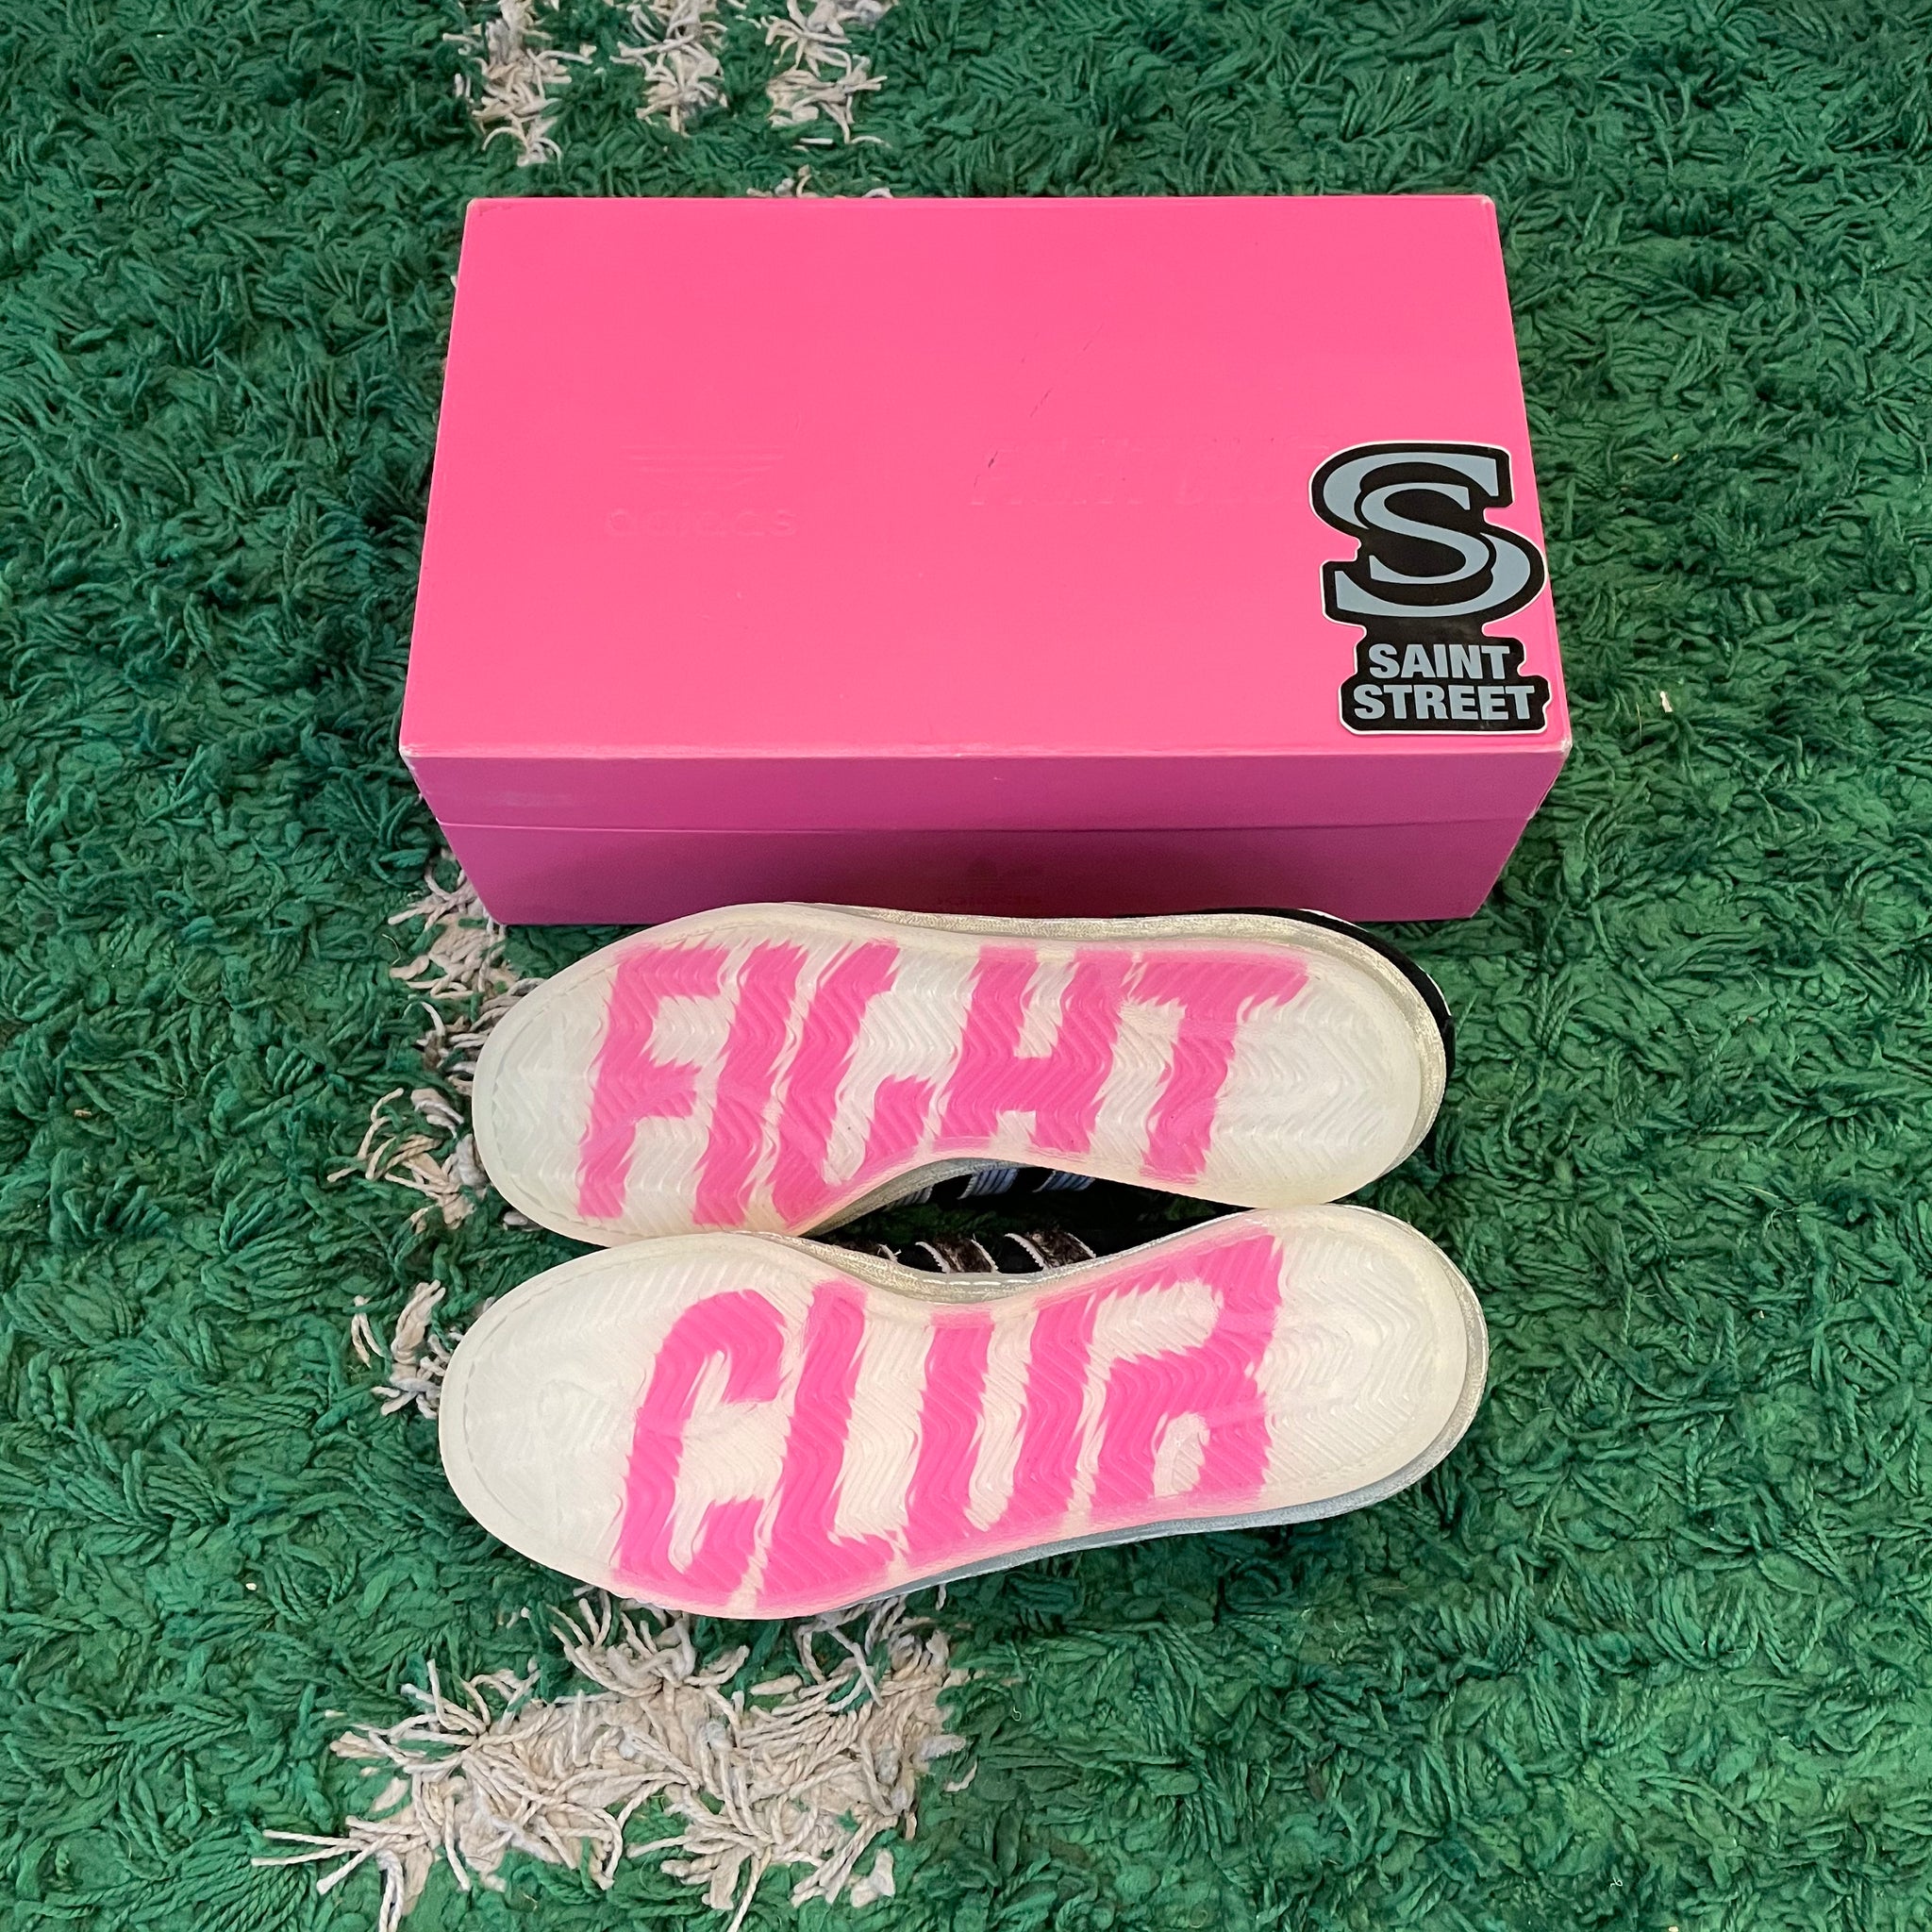 Adidas X Fight Club X Size? Campus 80s (Online only) – SaintStreetSneakers